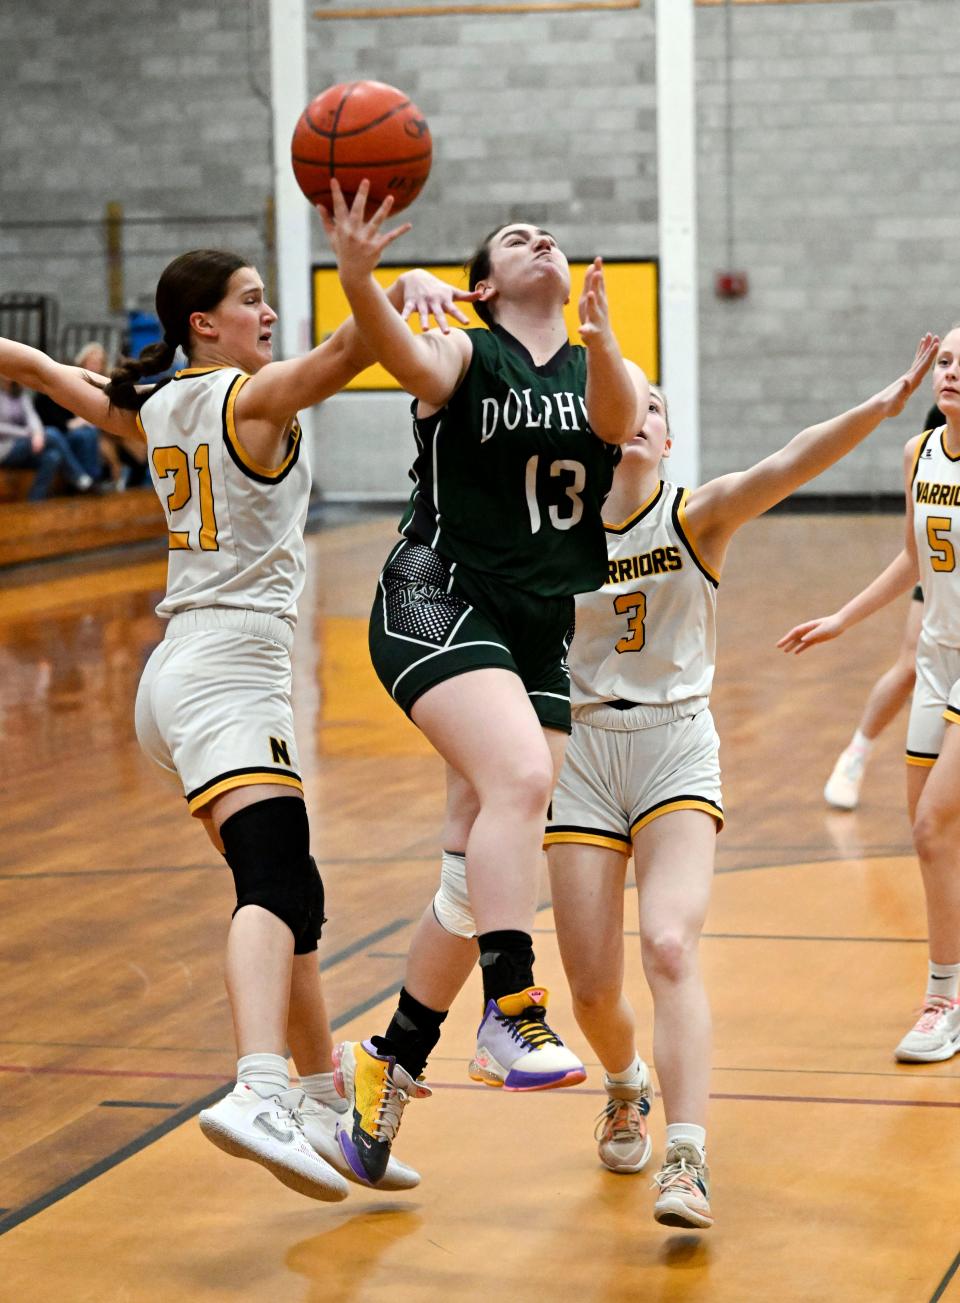 Savannah Azoff of D-Y goes in for a layup between Gabby Foster (21) and Jordyn Streitmatter of Nauset on Feb. 17, 2023.